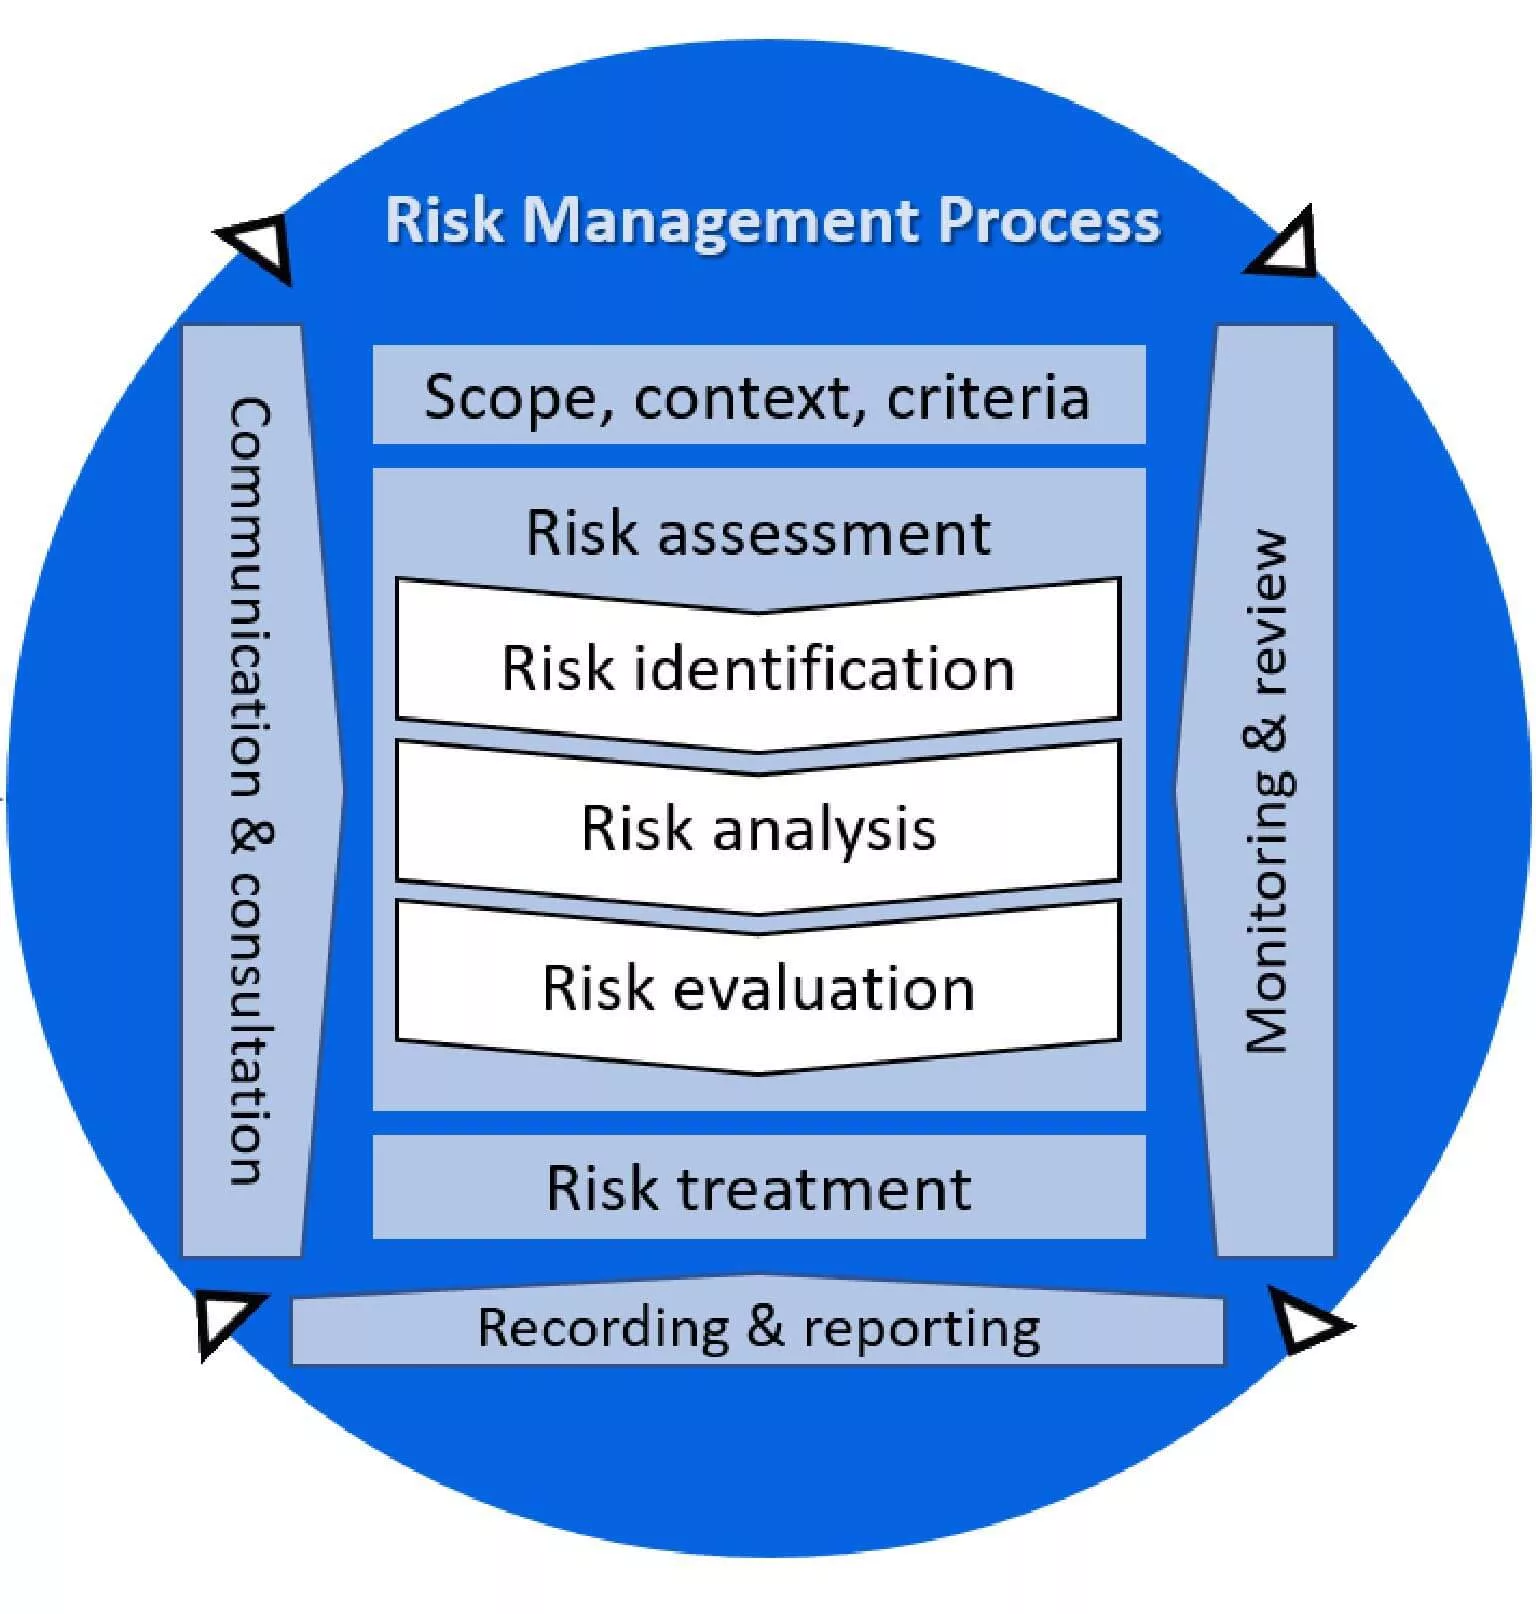 Risk management process lifecycle.